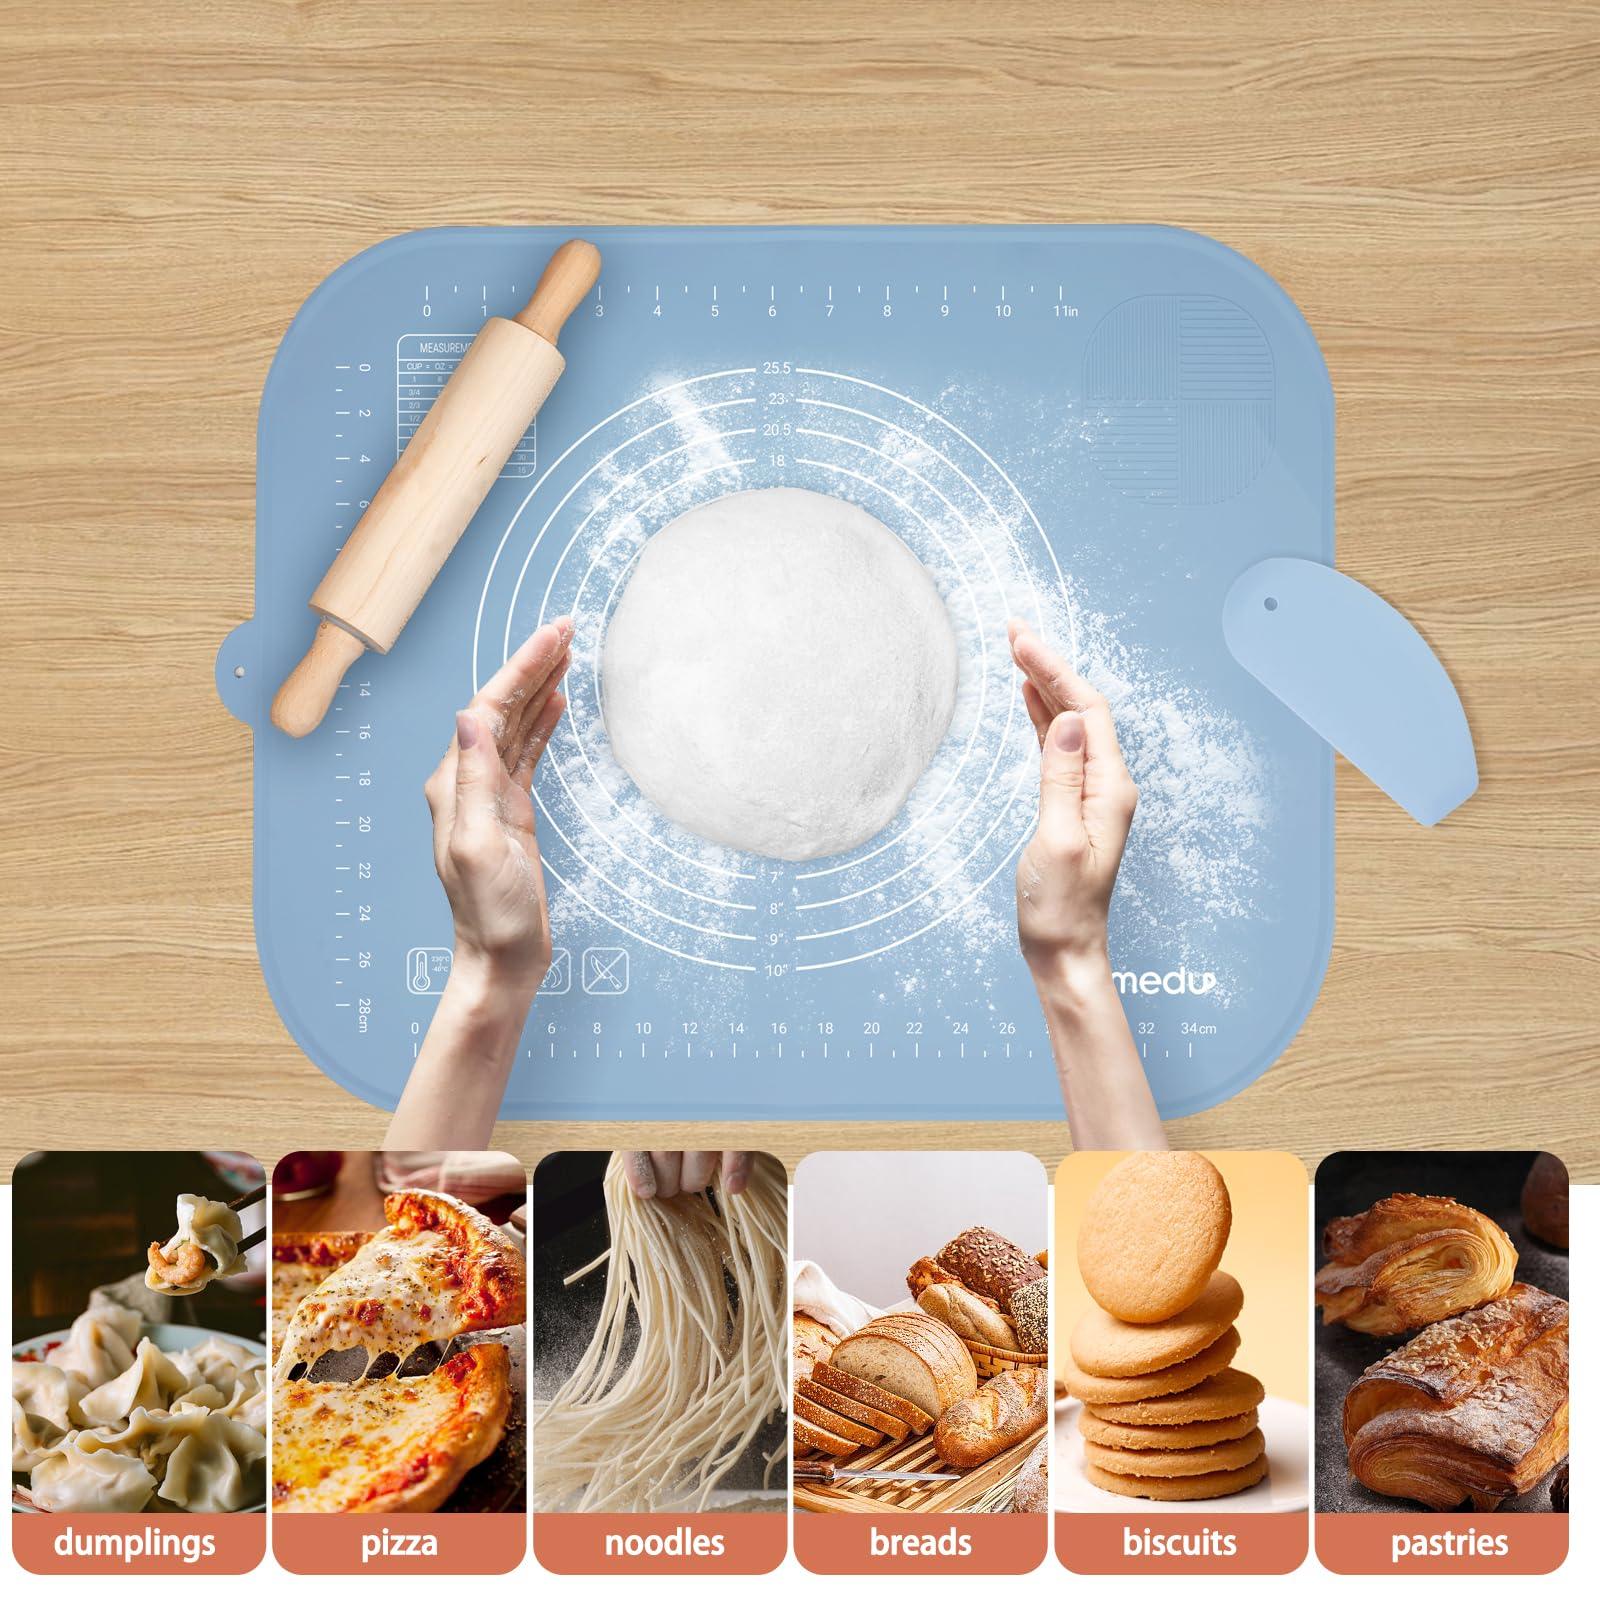 Parmedu Thickened Silicone Pastry Mat: 20"*16" Non-stick Kneading Mat in Compact Size with Storage Belt & Dough Cutter - Heatresistant Silicone Countertop Mat Dough Rolling Mat for Making Pastry Pasta - CookCave